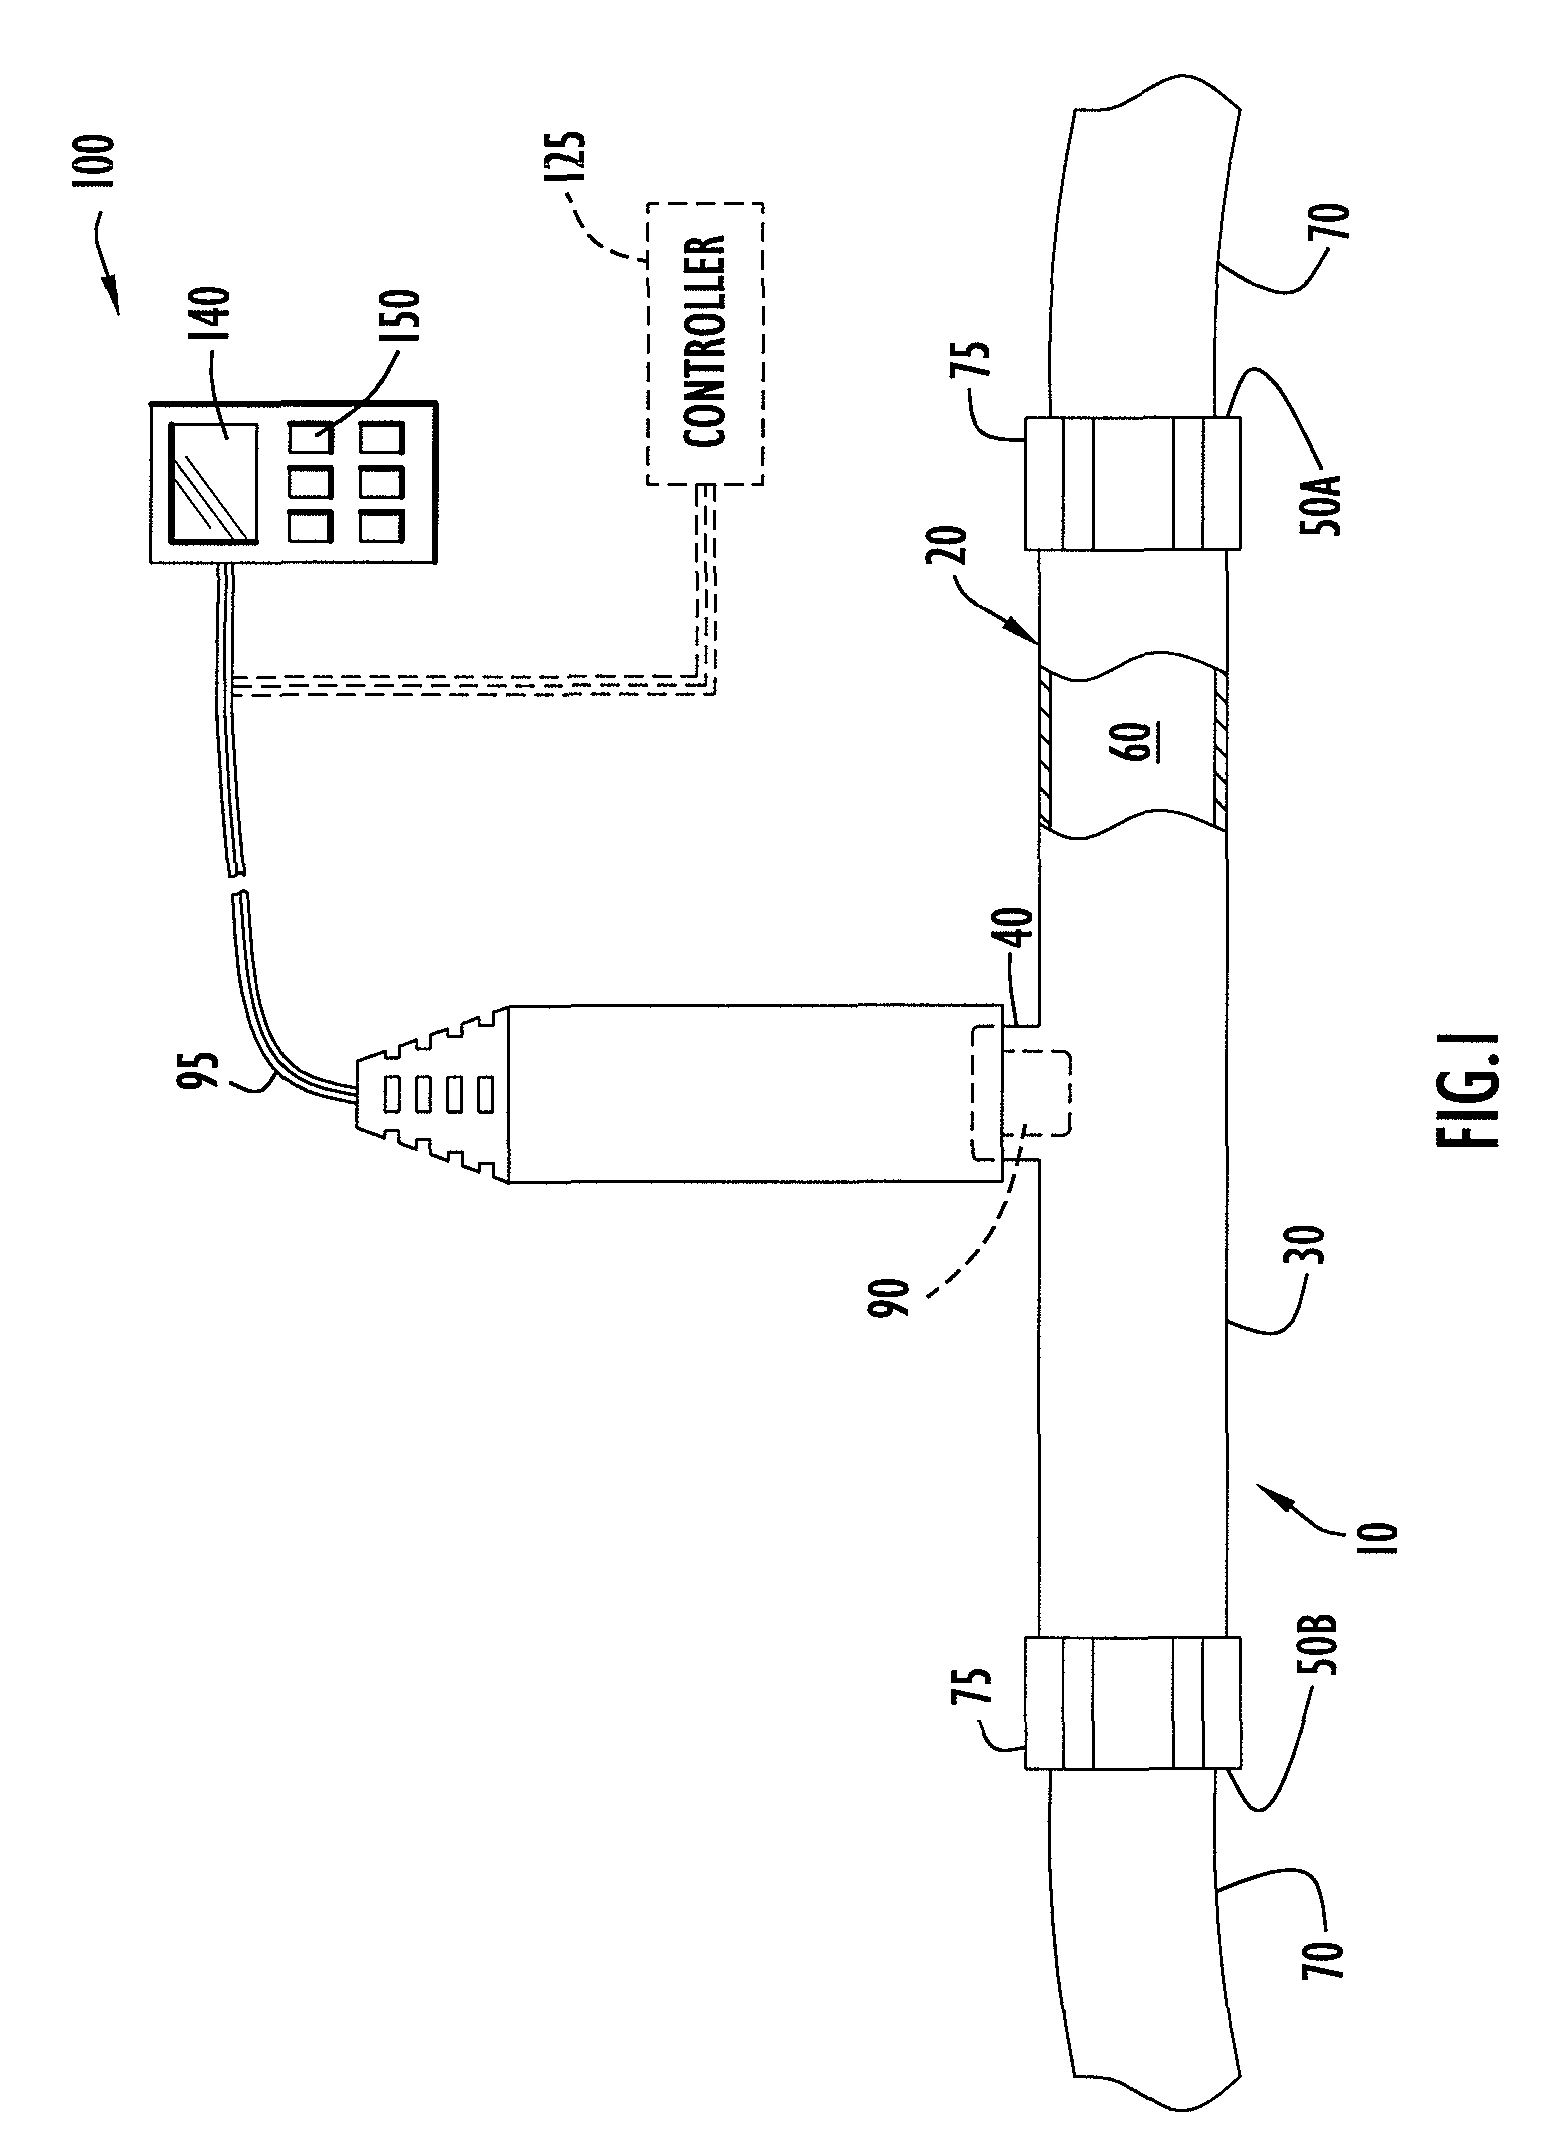 Method and apparatus for measurement and control of temperature for infused liquids